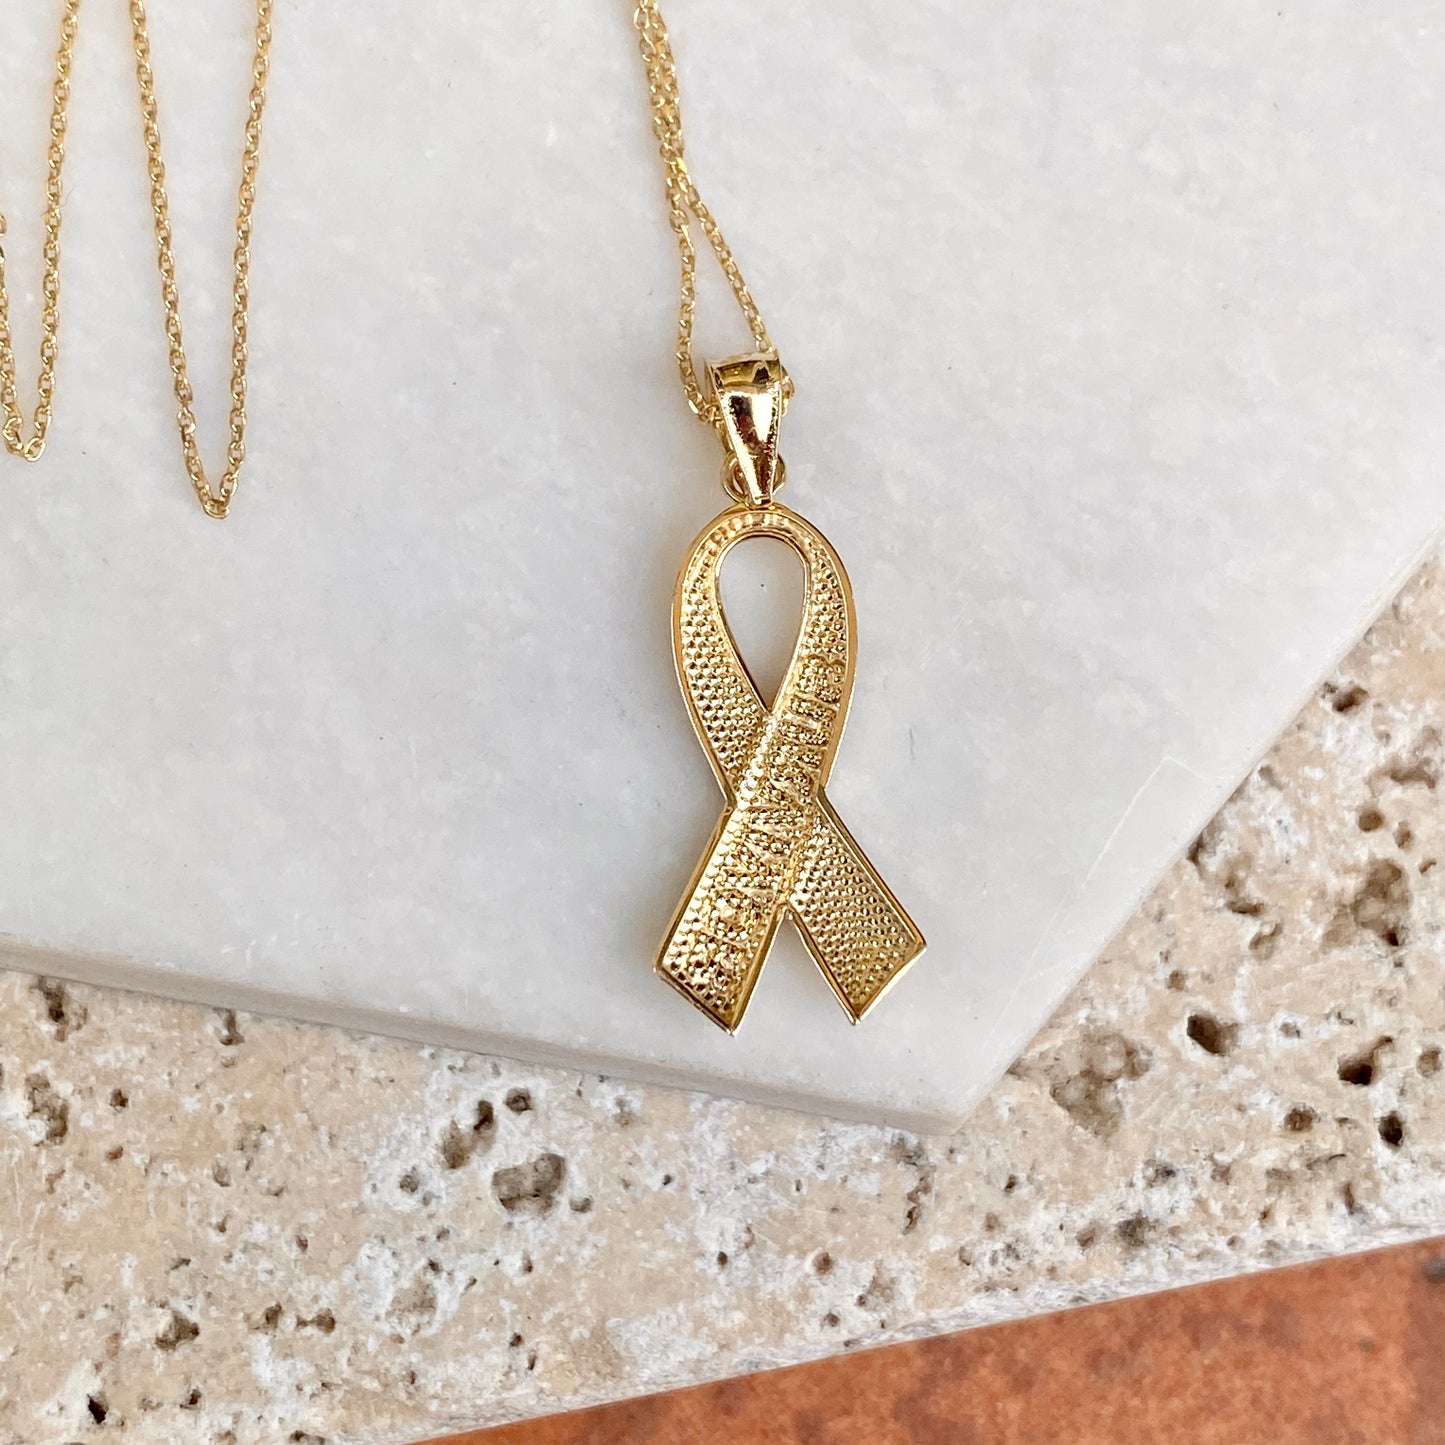 14KT Yellow Gold Cancer Awareness Survivor Ribbon Pendant Chain Necklace